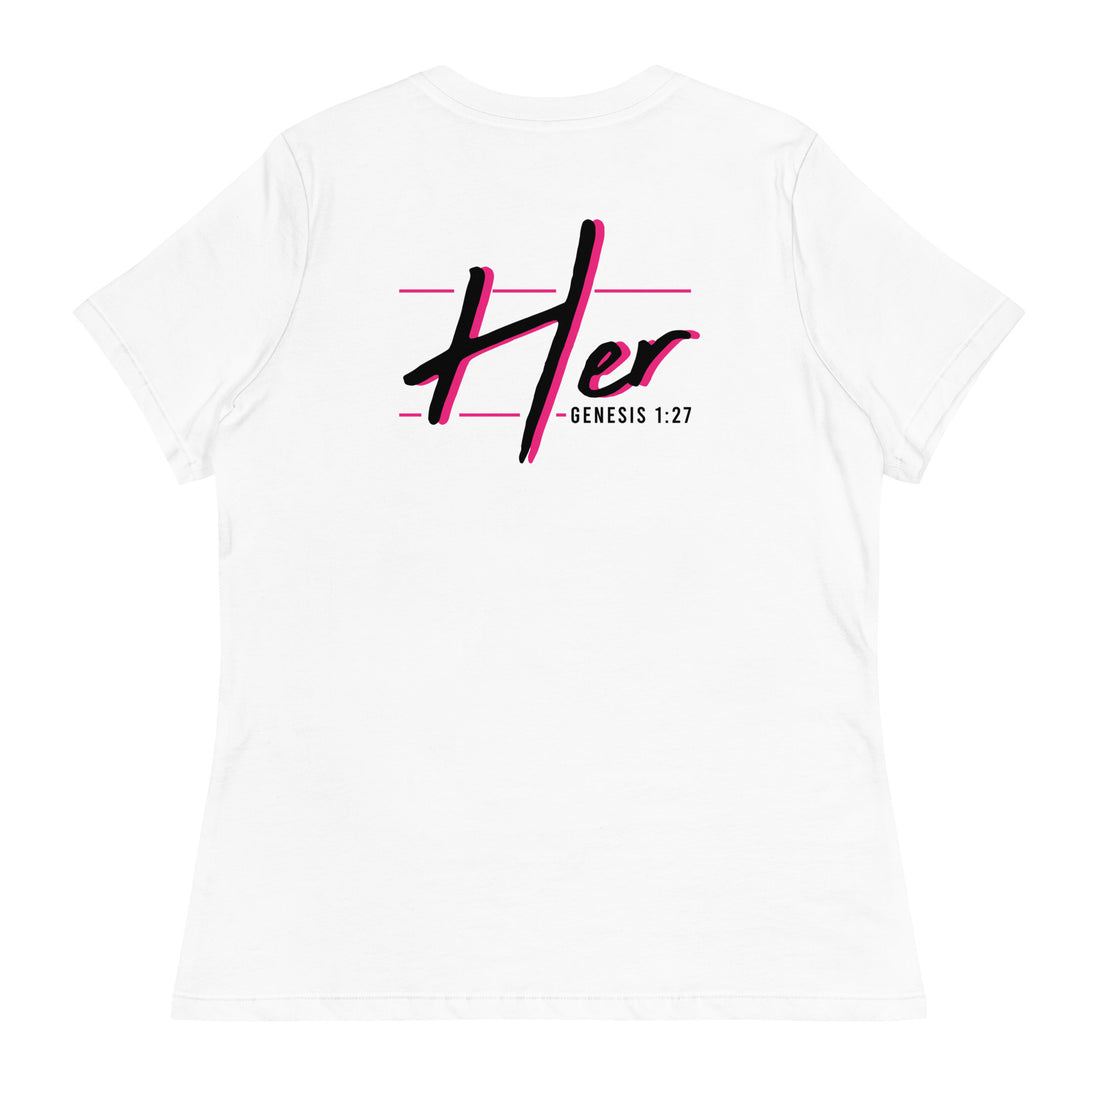 I AM HER WOMENS FRONT AND BACK T-SHIRT